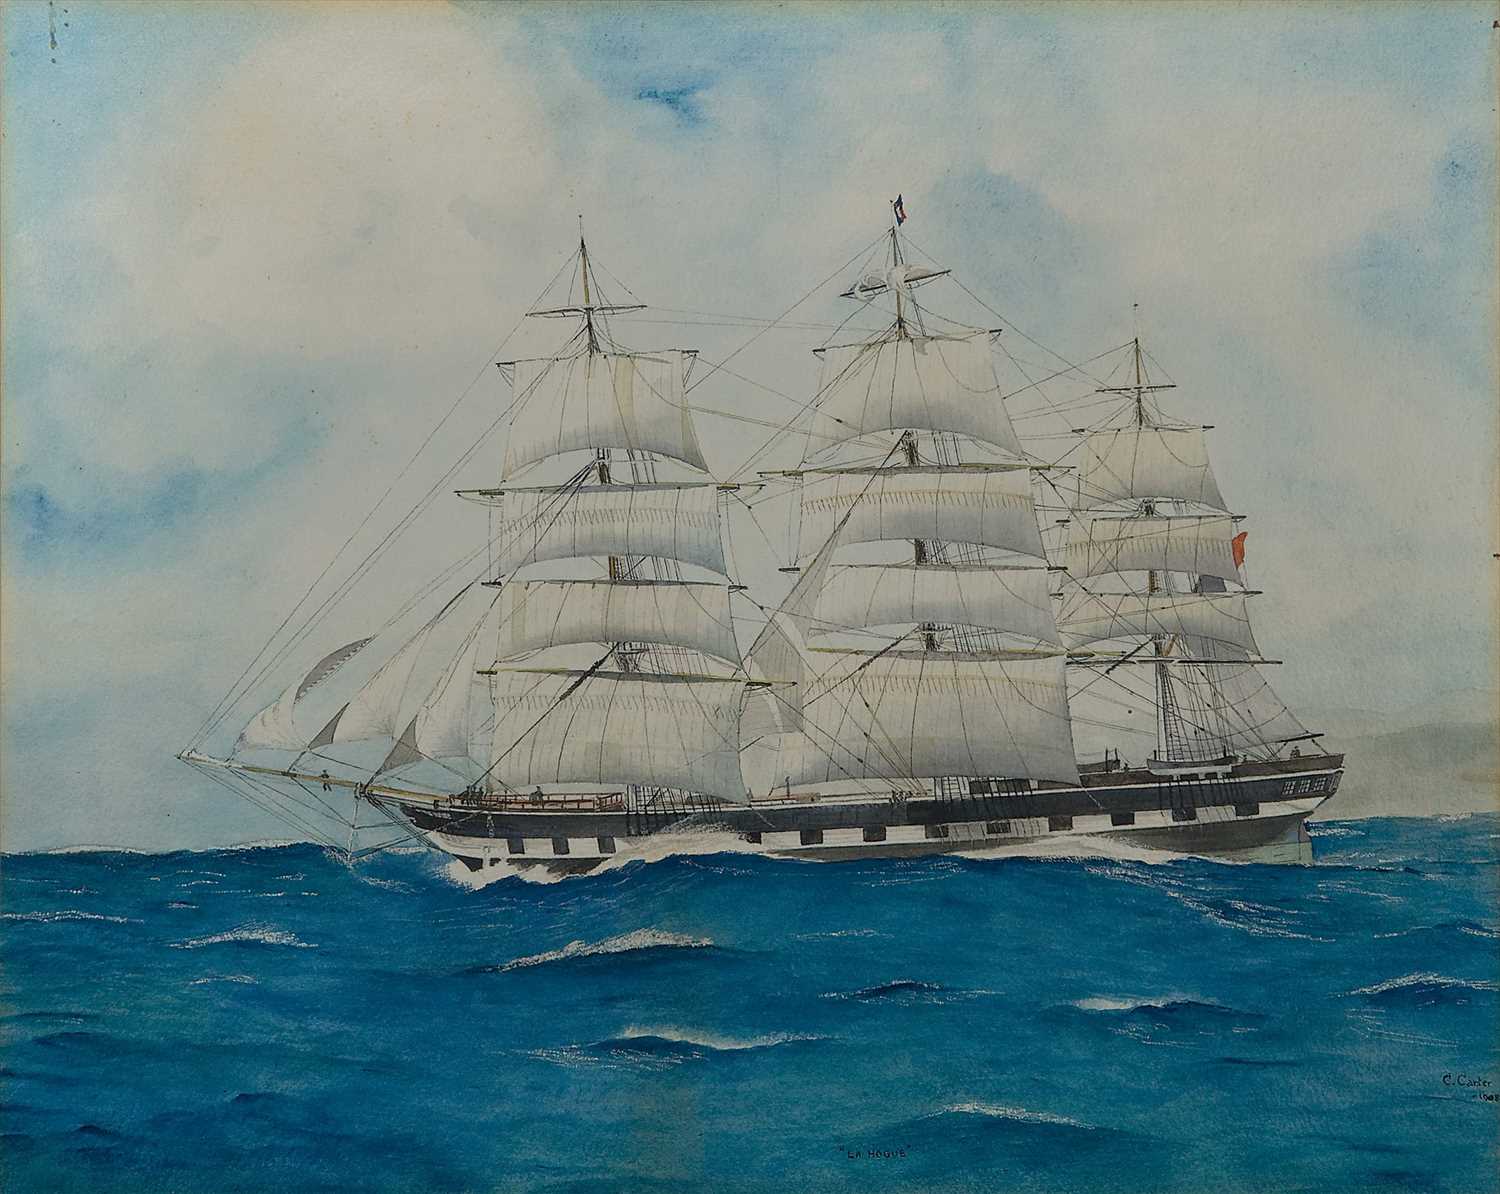 Lot 2 - C. CARTER (C. 1908)<br/><br/>The full-rigged ship Le...